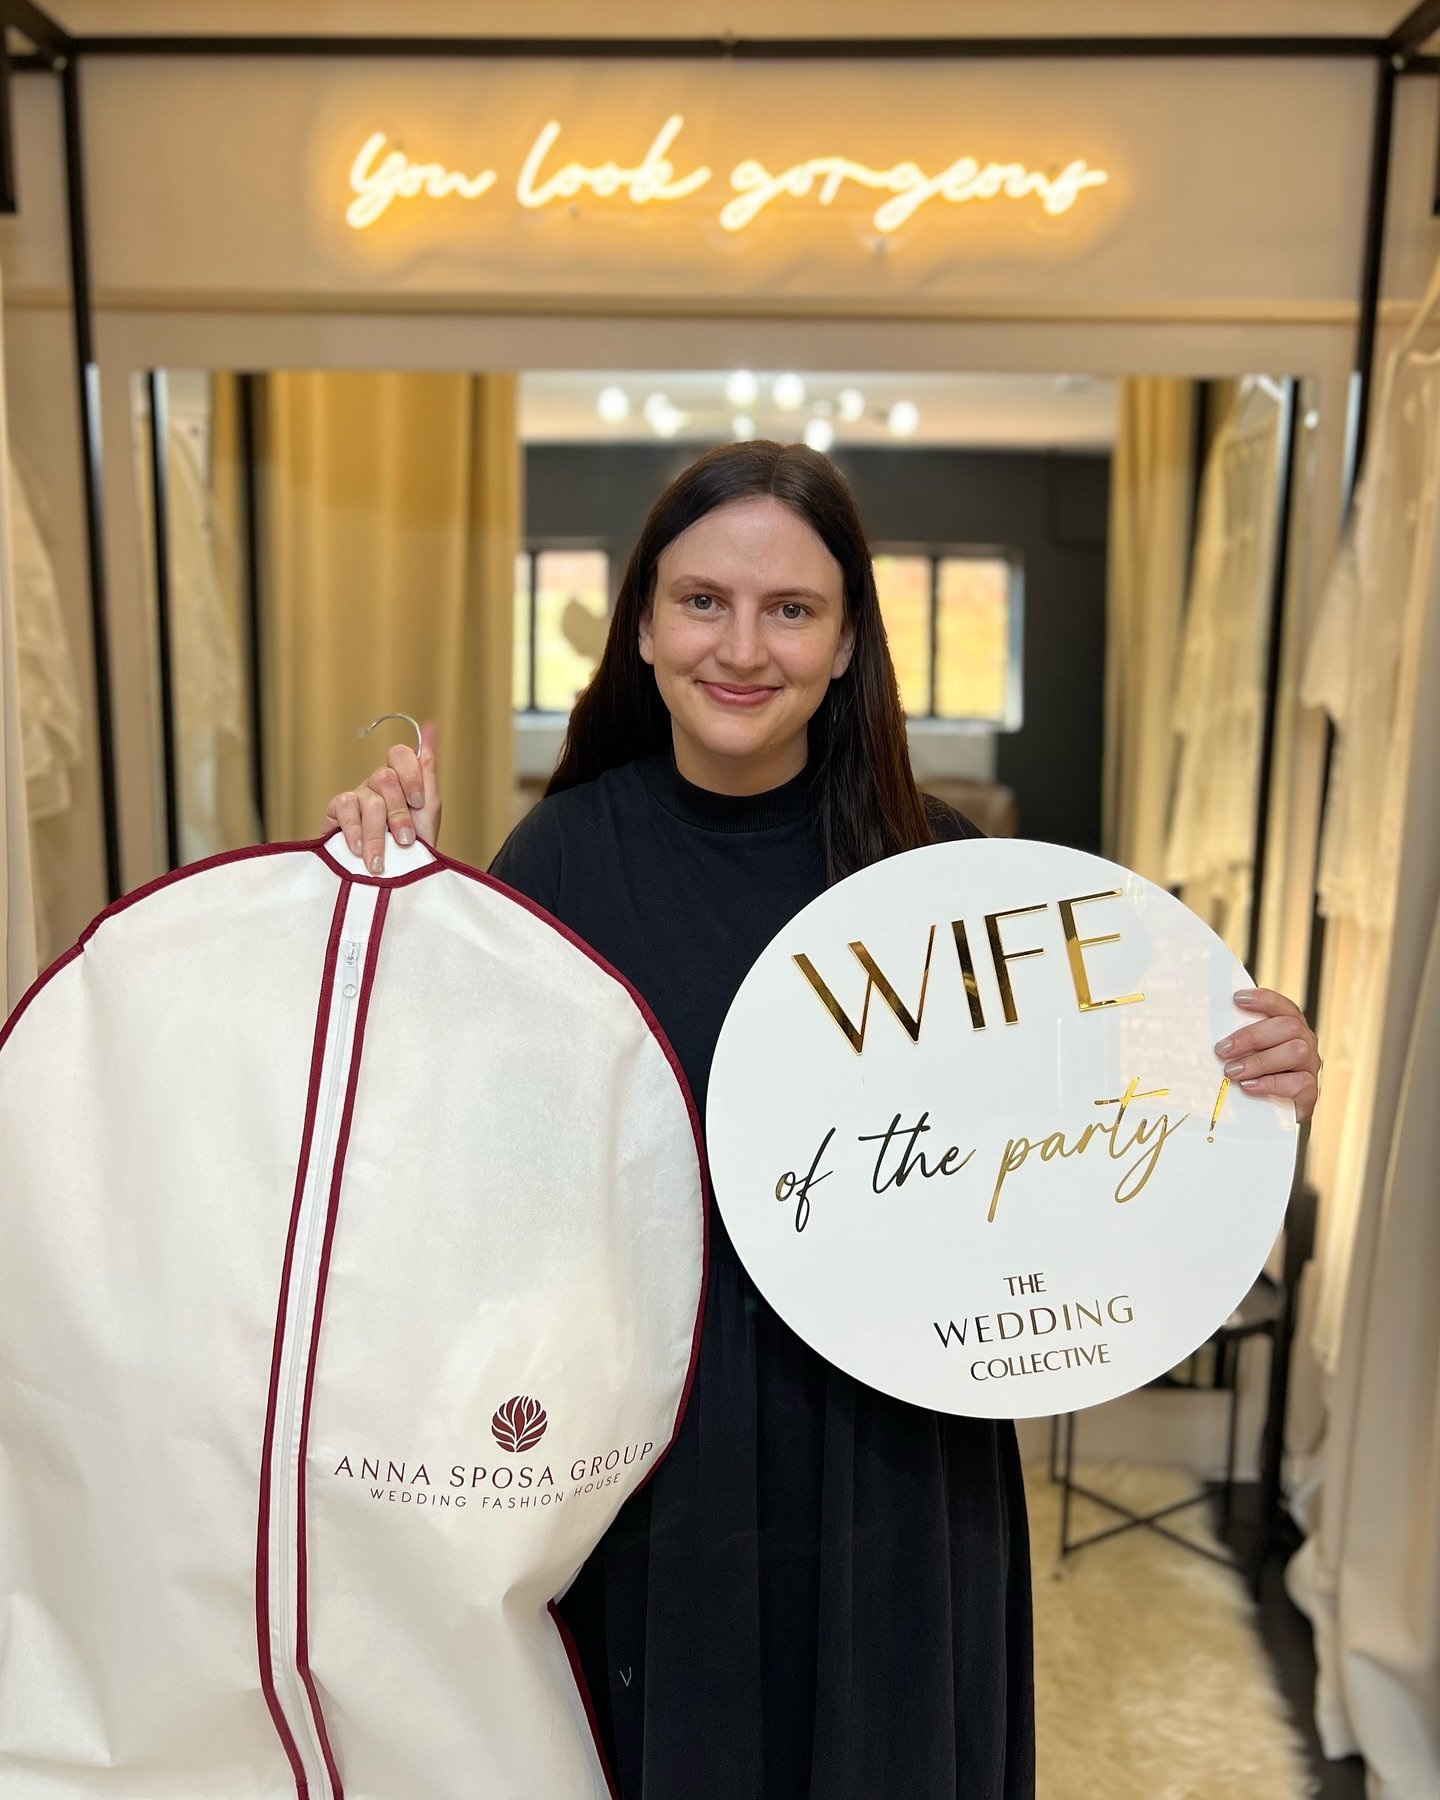 Tomorrow is our beautiful Ren&eacute;&rsquo;s wedding day! Thanks for choosing us to make your wedding dress dreams come true Ren&eacute;, it was such a pleasure having you as a bride. We can&rsquo;t wait to see how beautiful you look in your @annasp